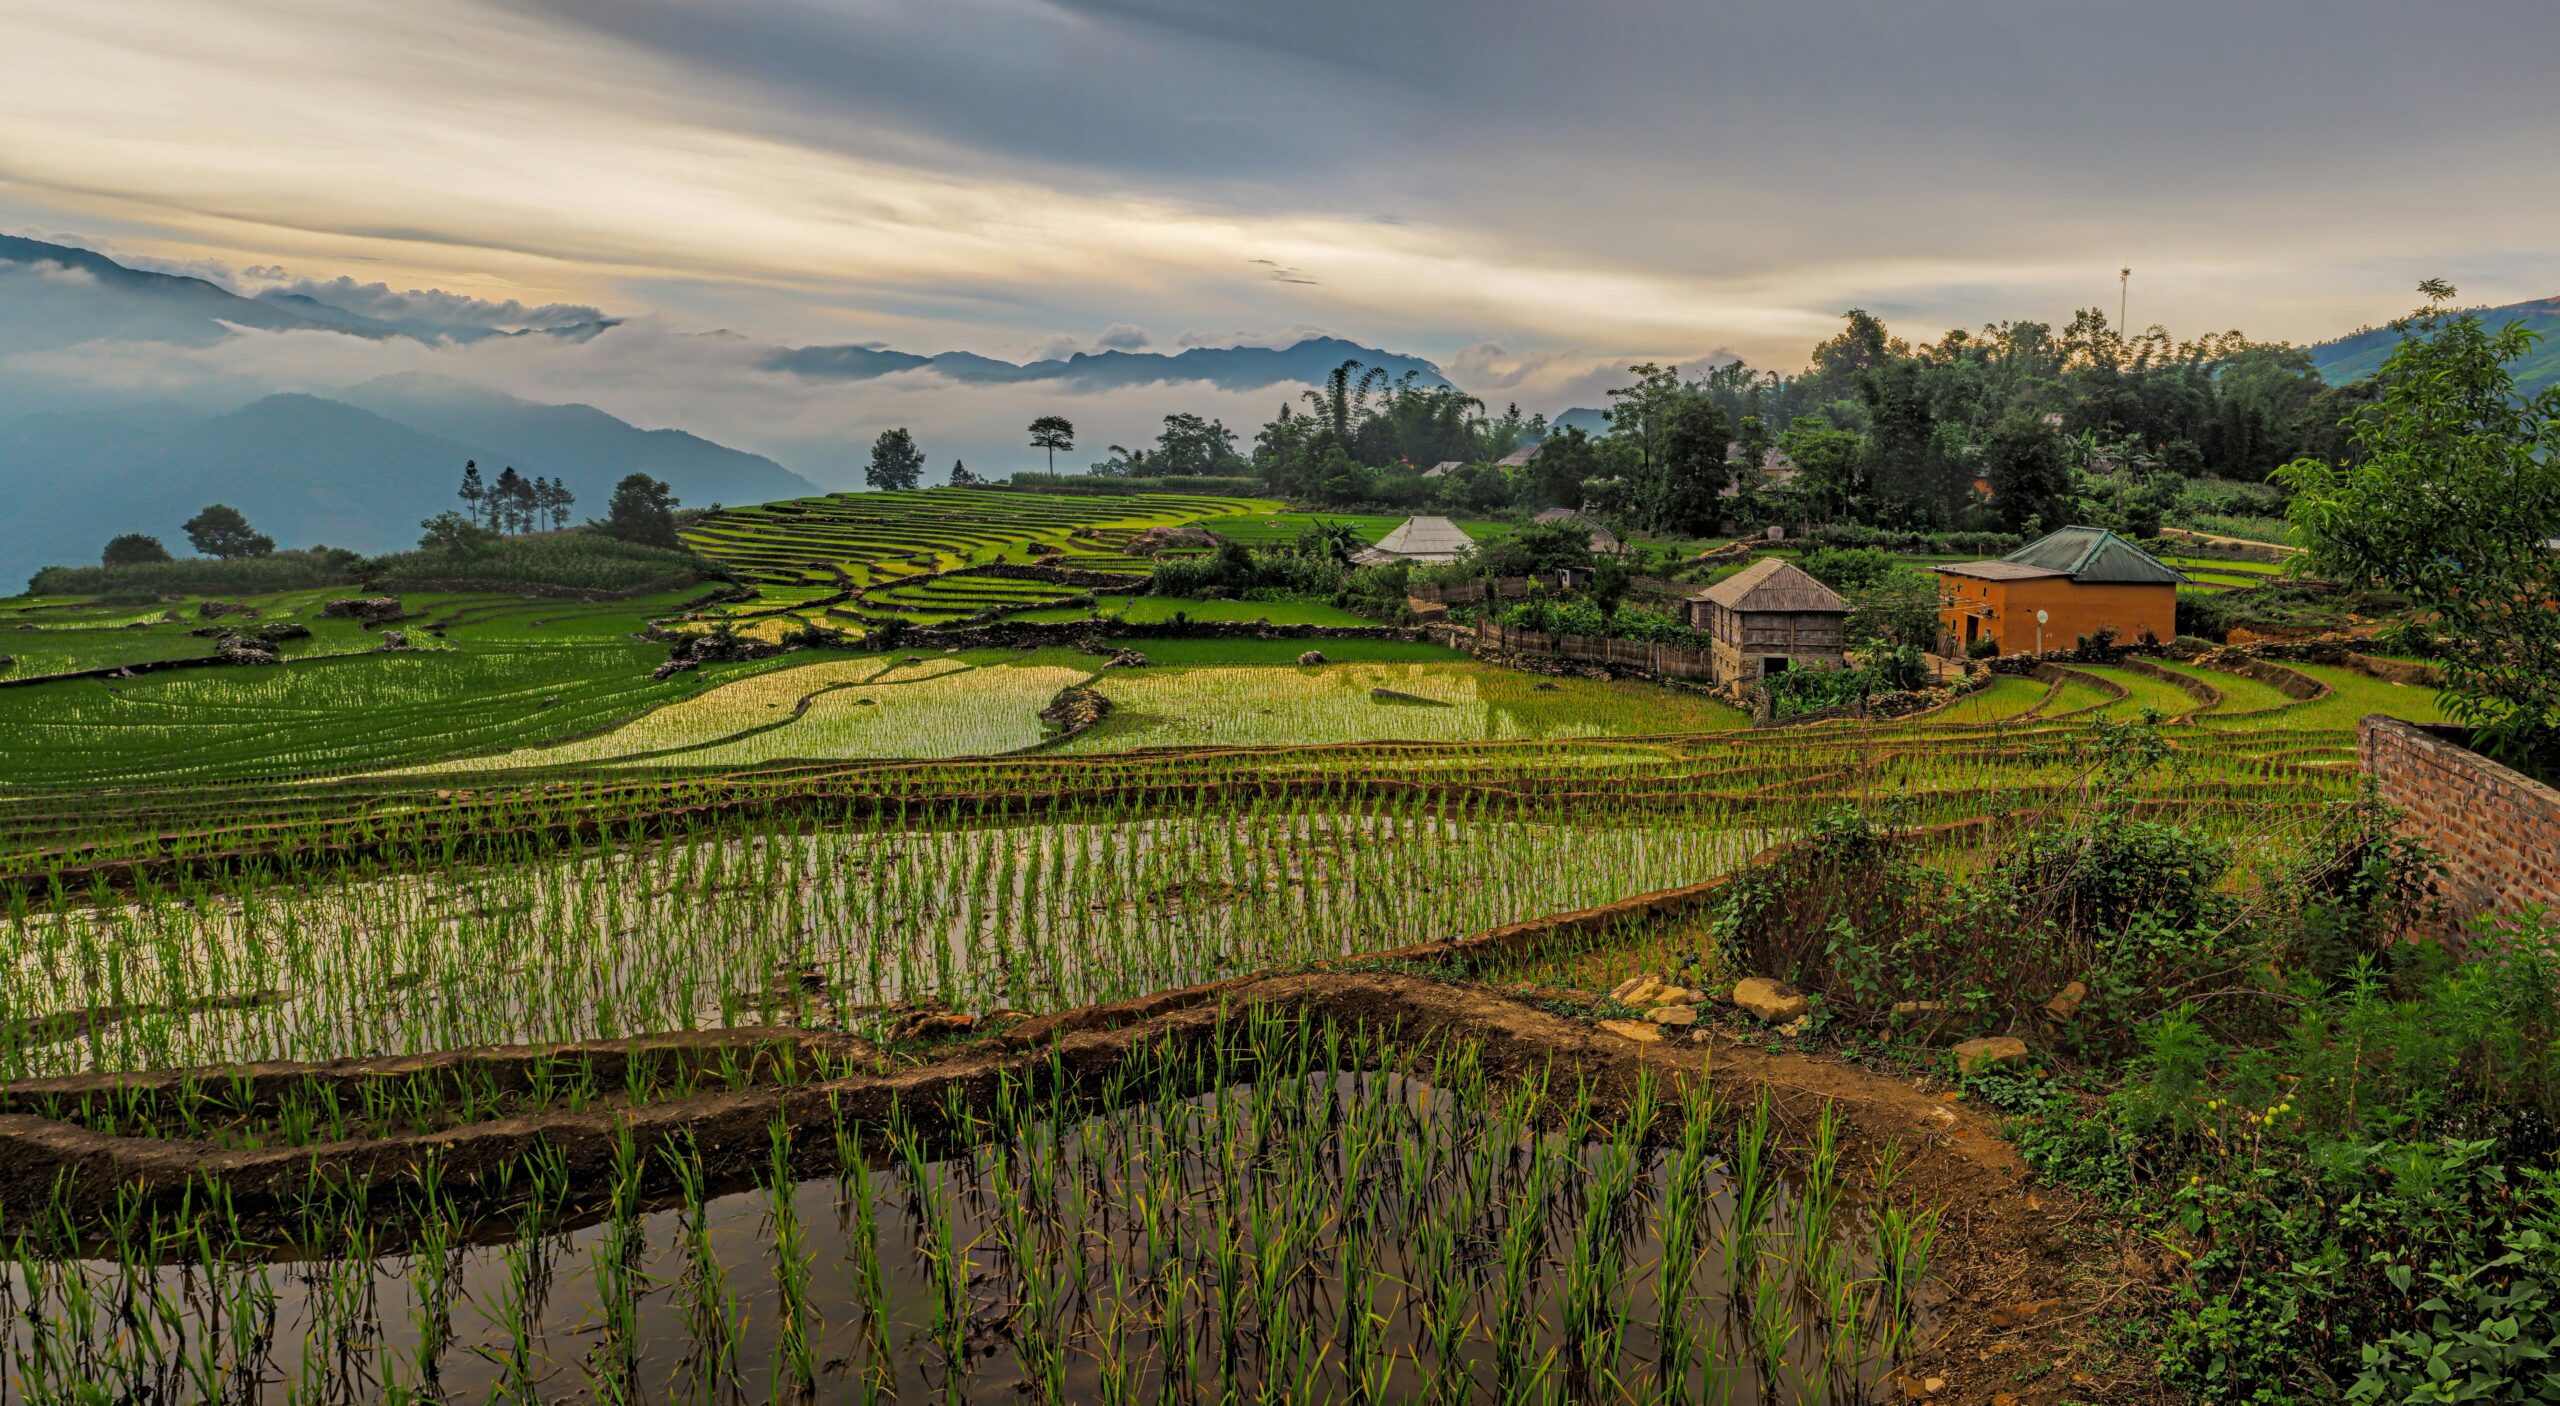 The village of Y Ty is at the extreme north of Vietnam and is well off the normal tourist route. The road overlooks the Chinese border in many places. Photo by Peter Hammer in Unsplash